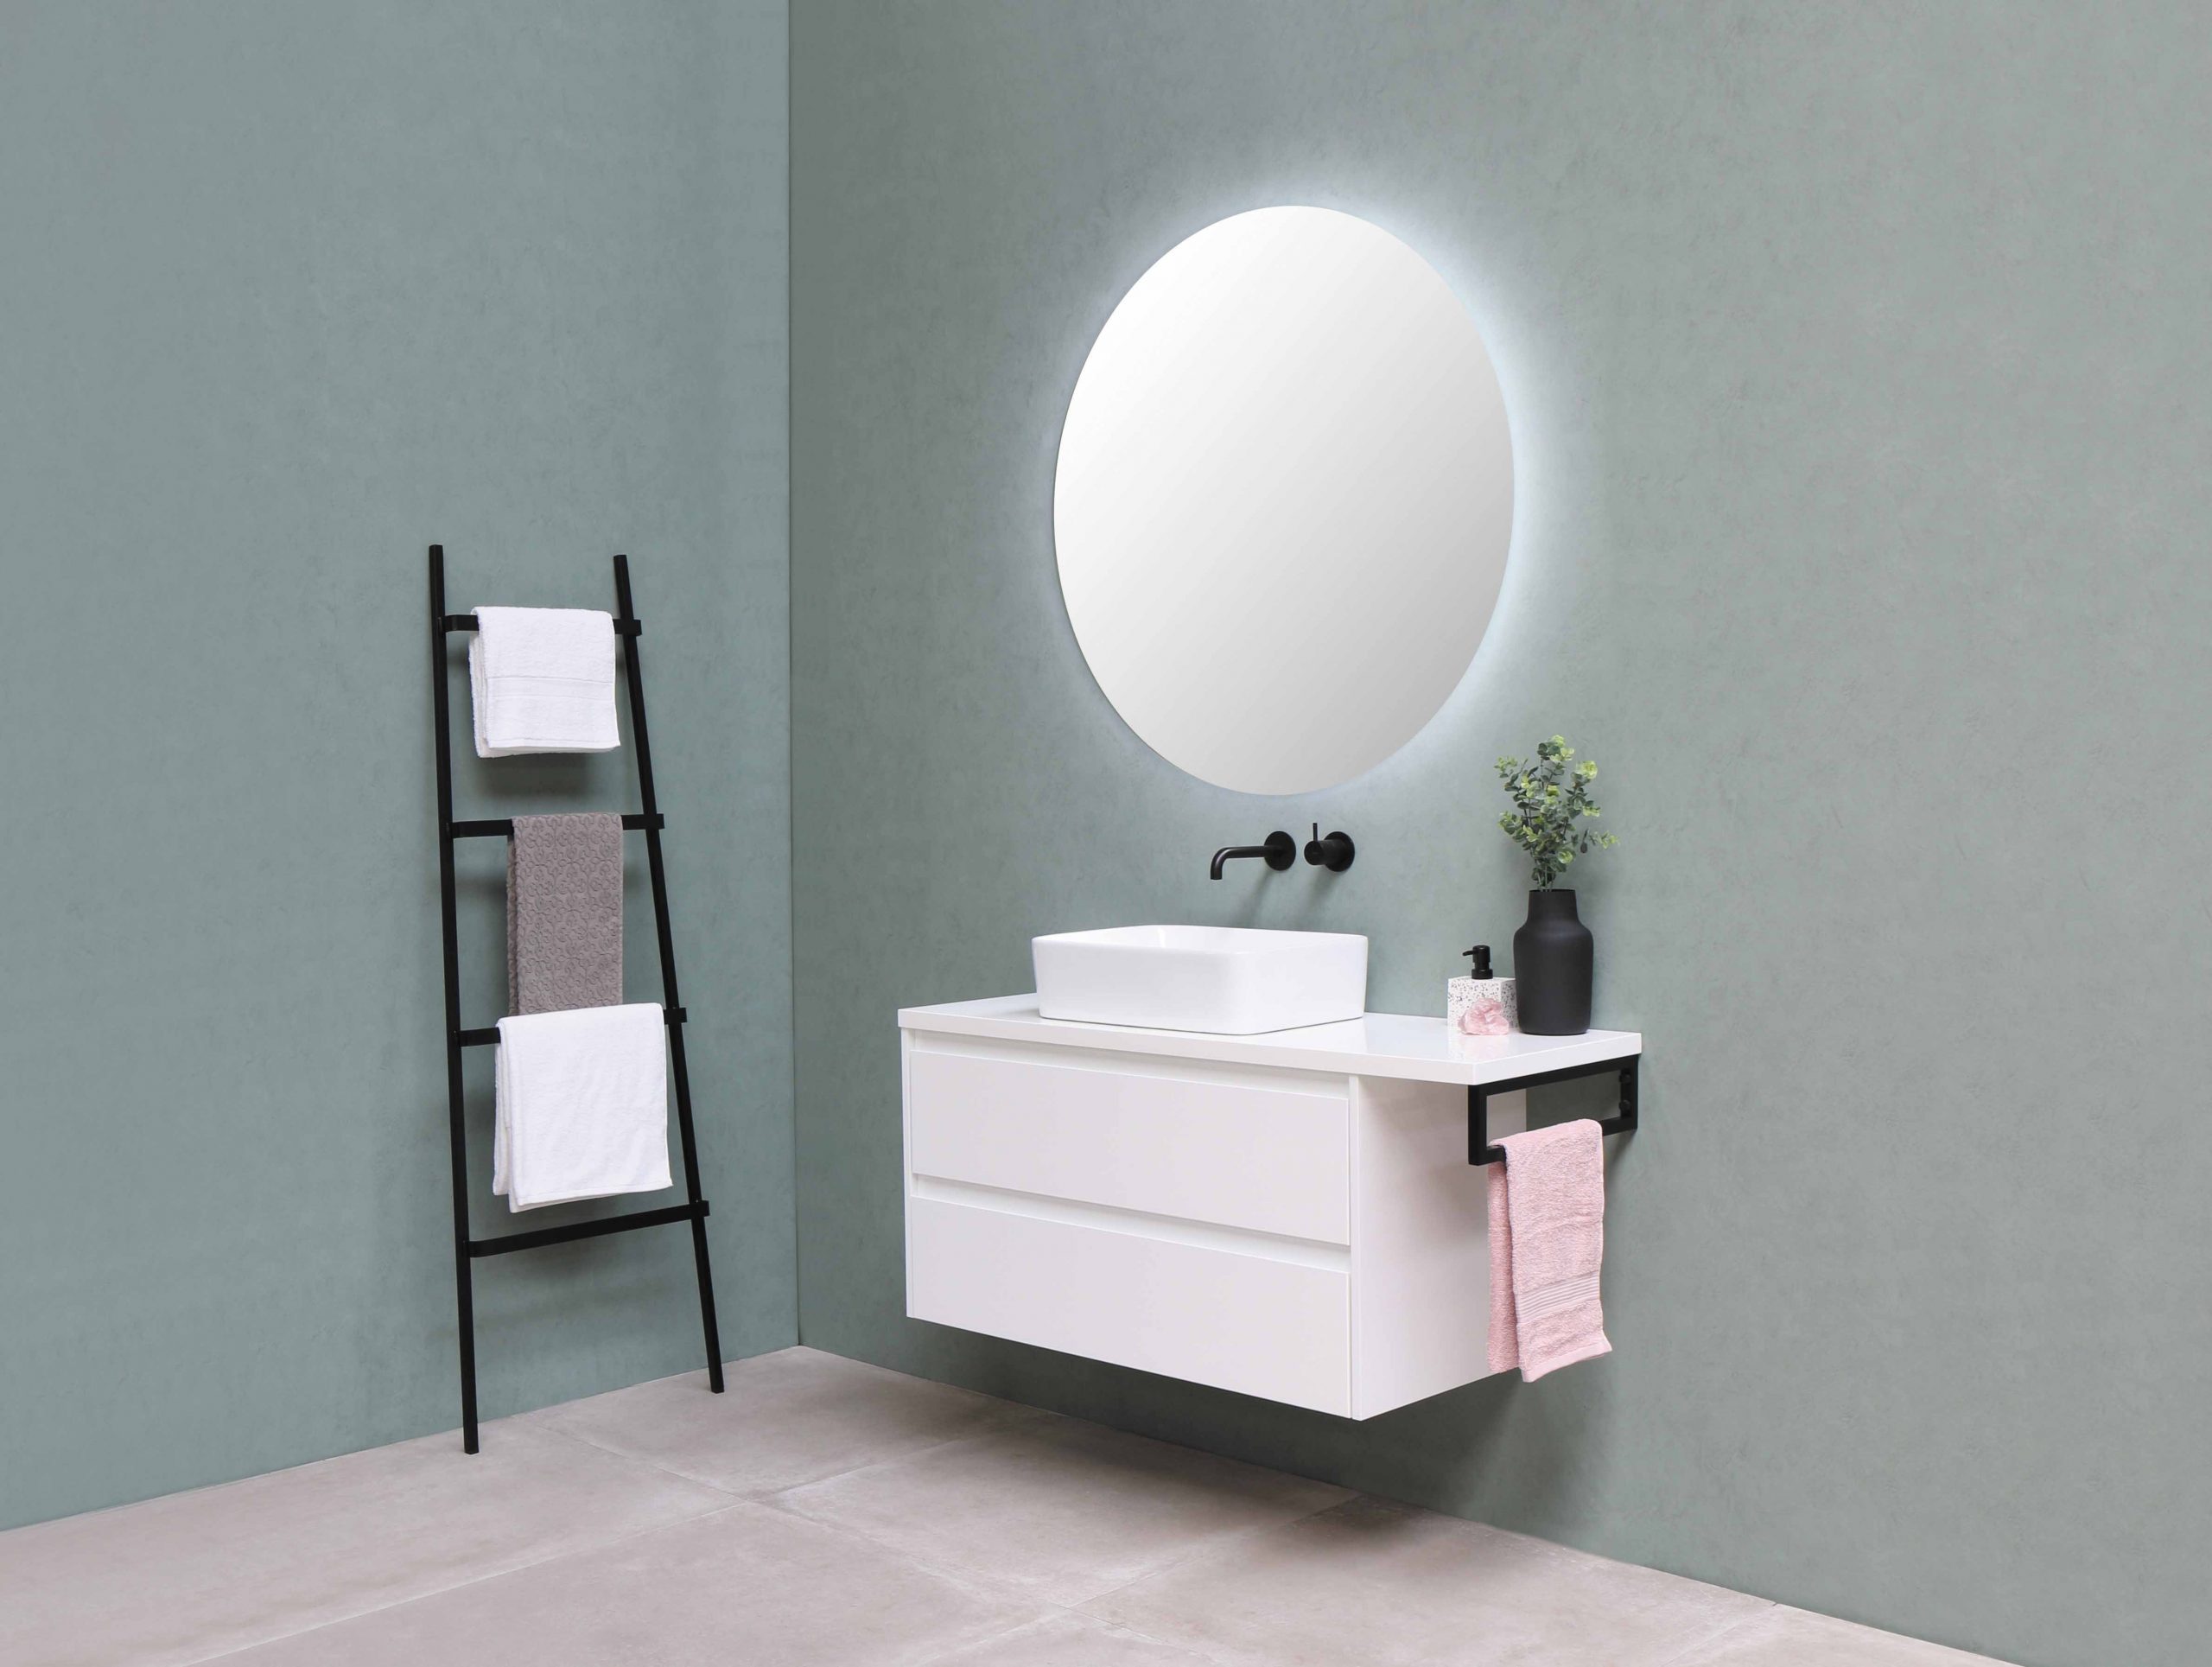 Wall hung vanity is perfect for the powder room